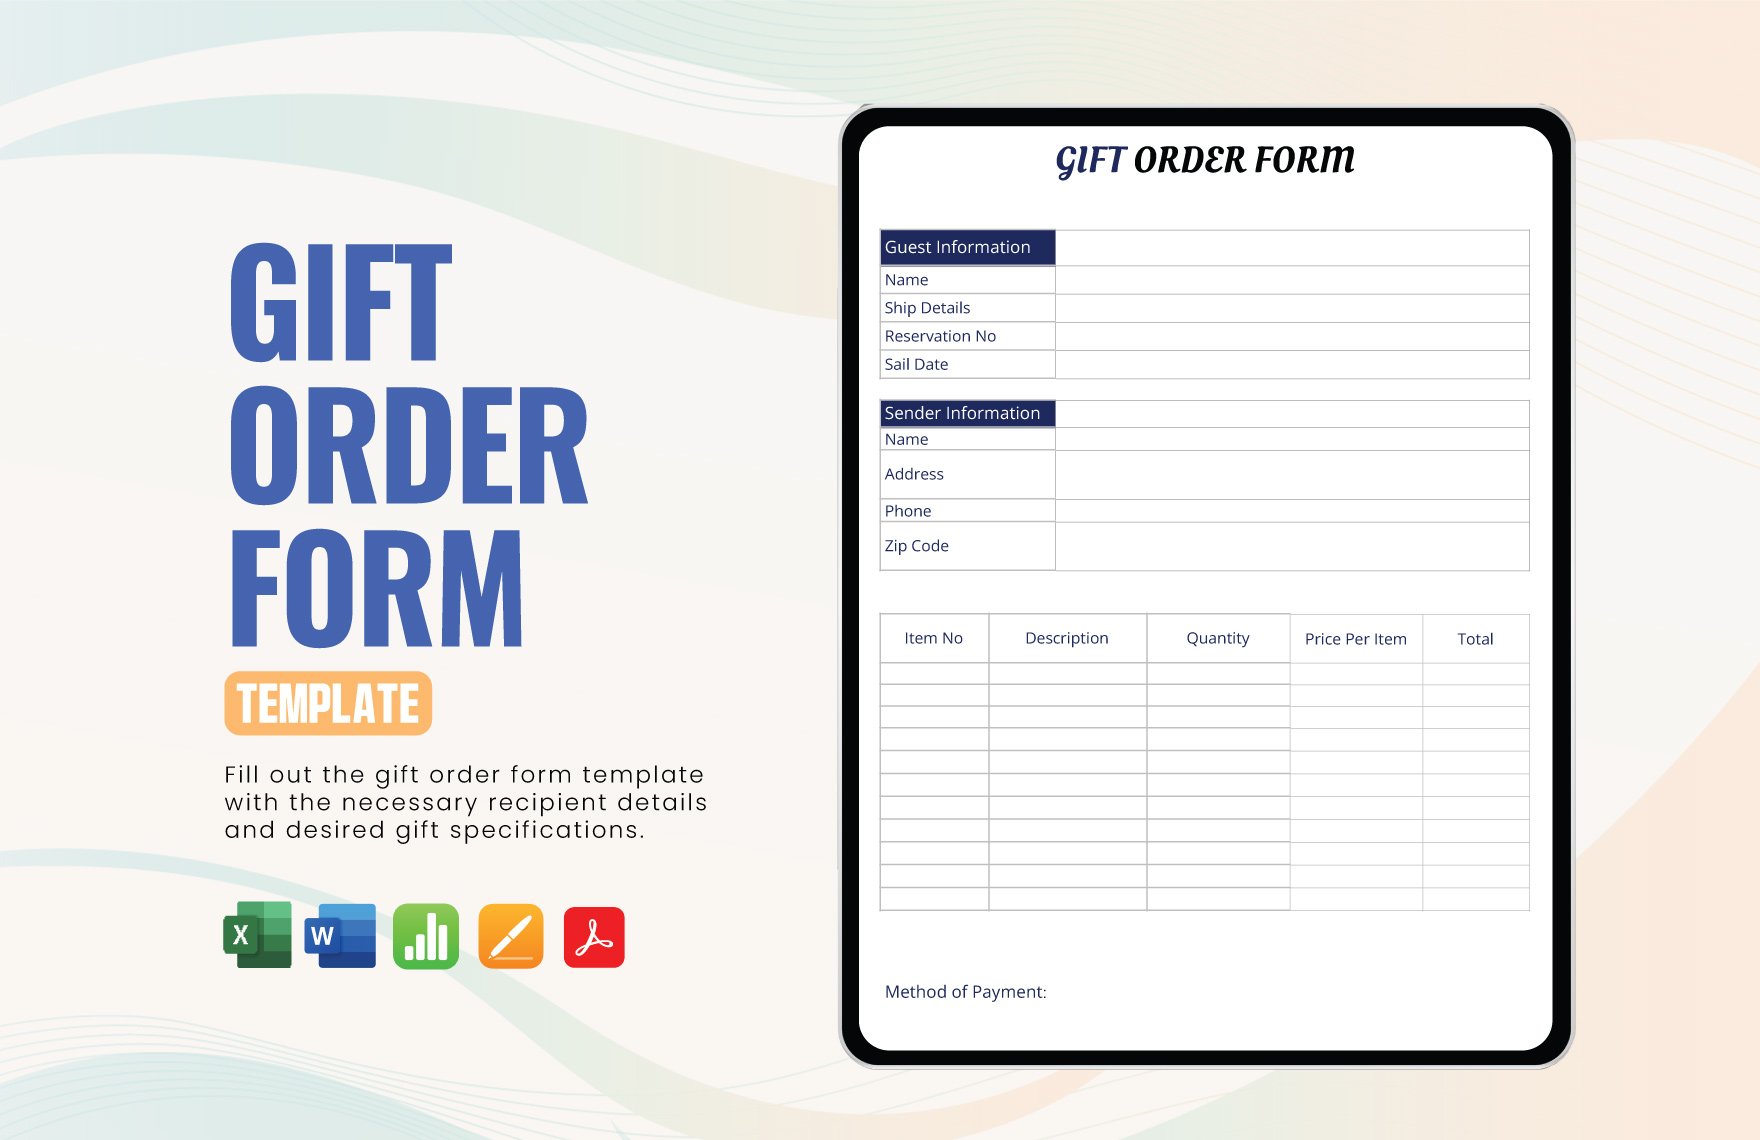 Gift Order Form Template in Word, Excel, PDF, Apple Pages, Apple Numbers